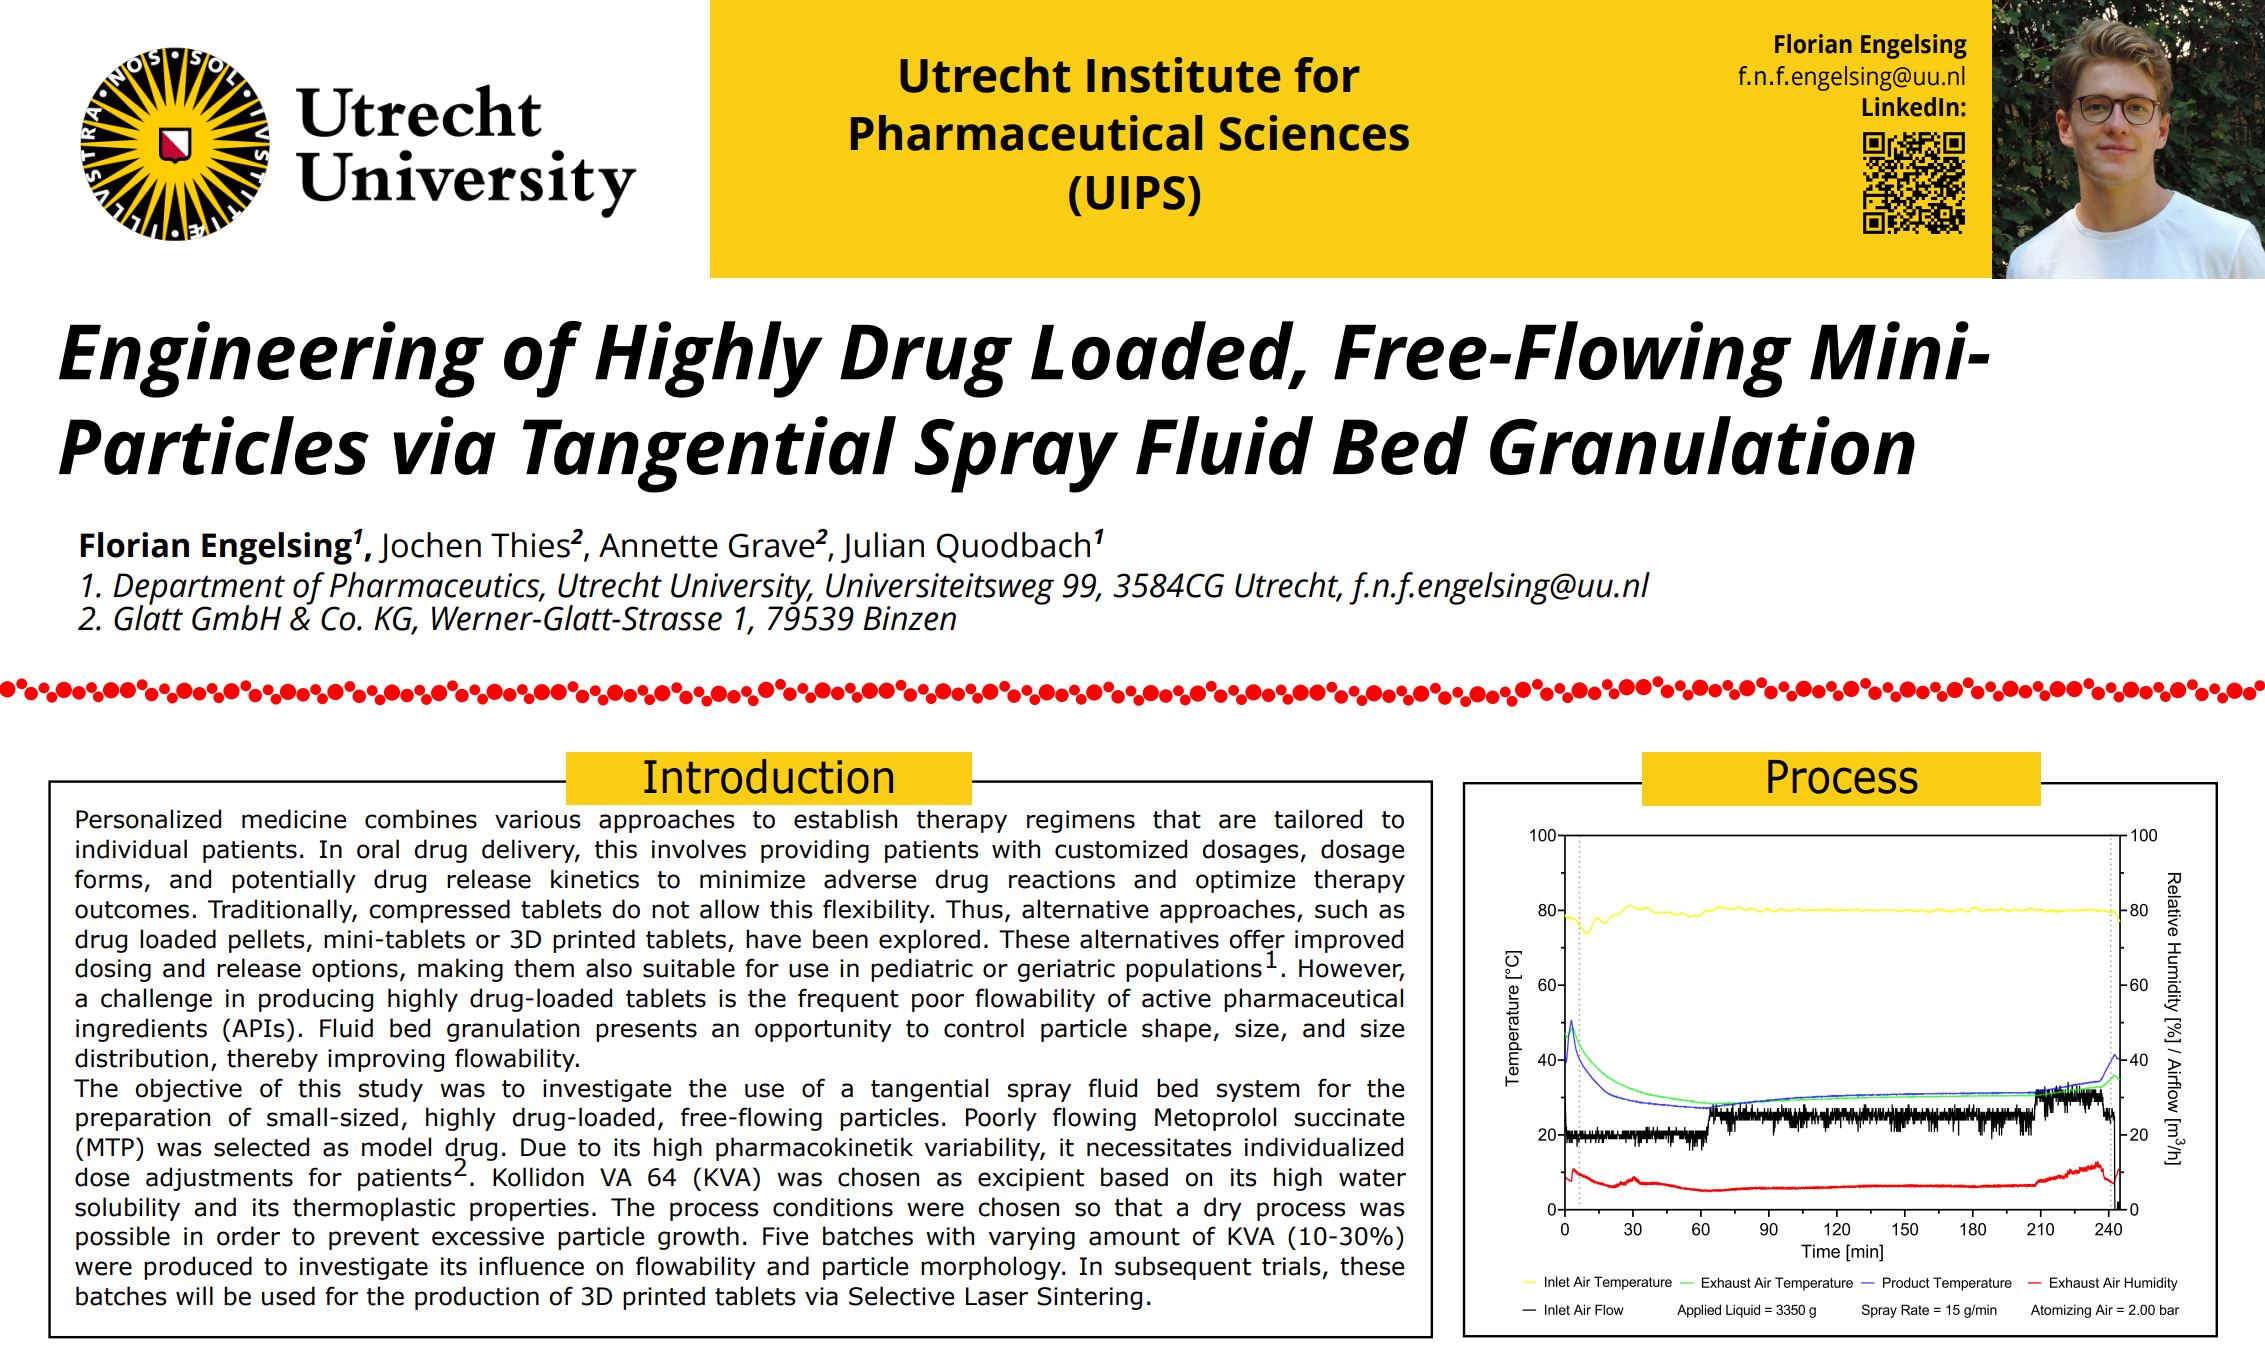 Engineering of Highly Drug Loaded, Free-Flowing Mini-Particles via Tangential Spray Fluid Bed Granulation